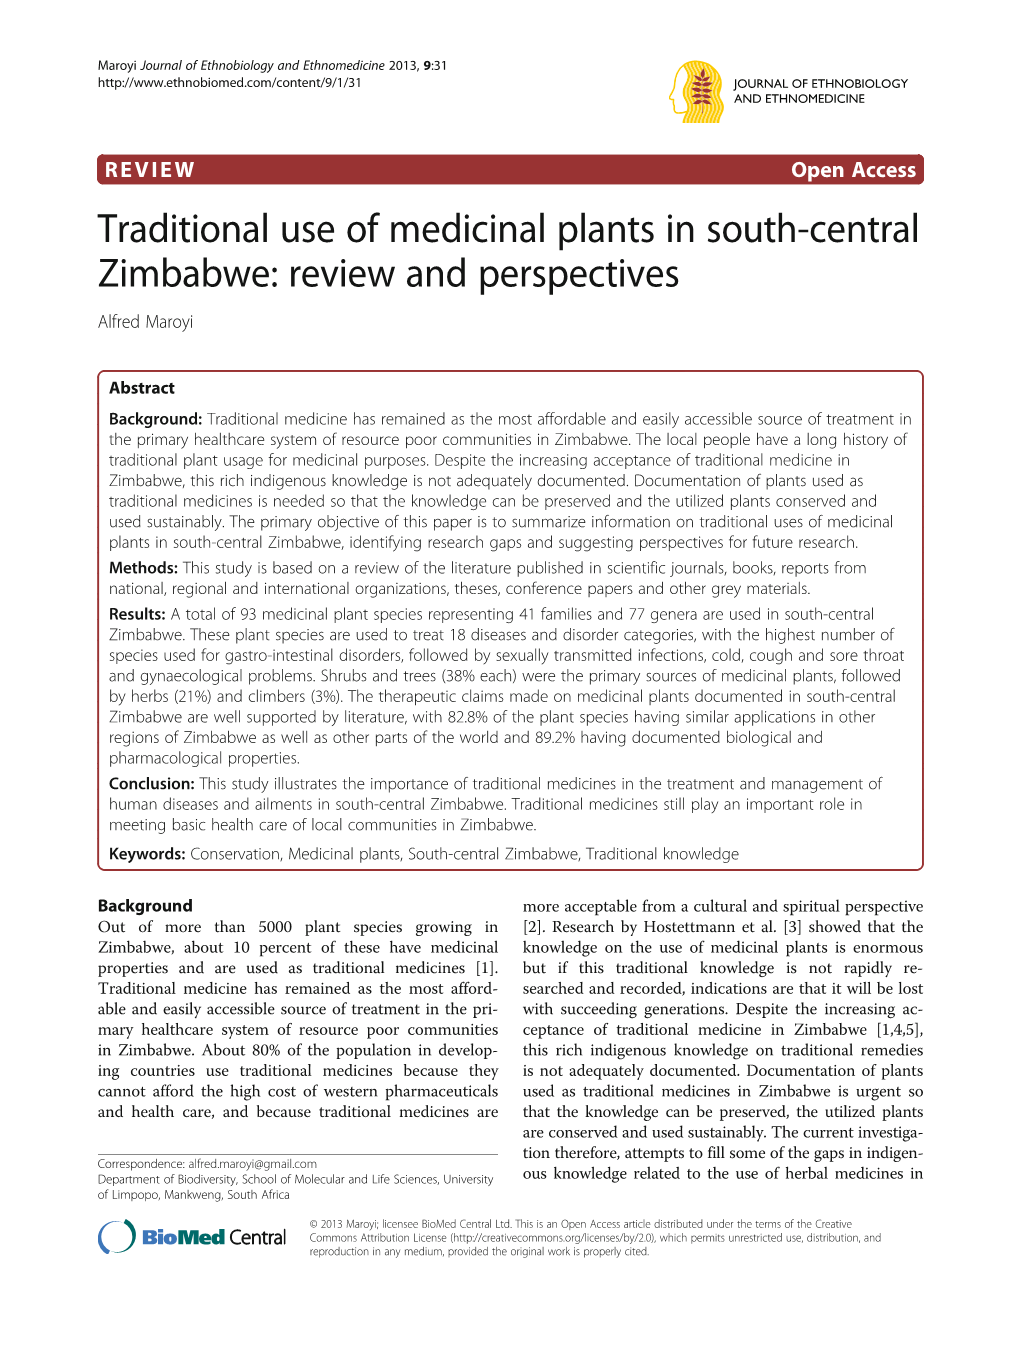 Traditional Use of Medicinal Plants in South-Central Zimbabwe: Review and Perspectives Alfred Maroyi